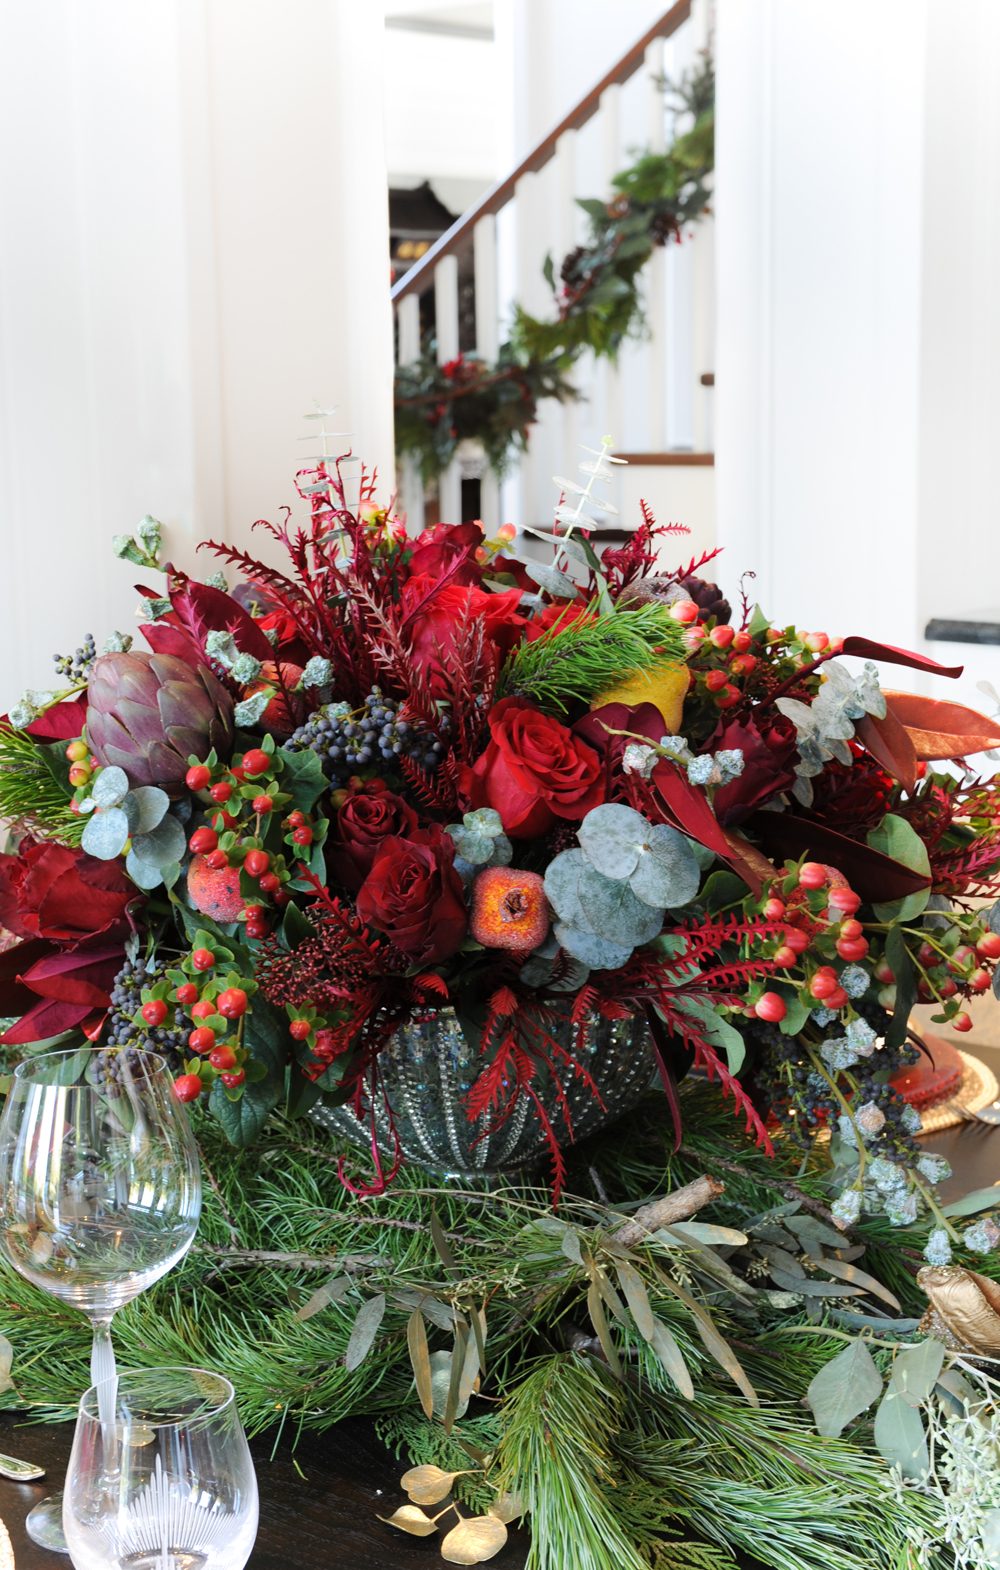 Festive holiday table centrepiece